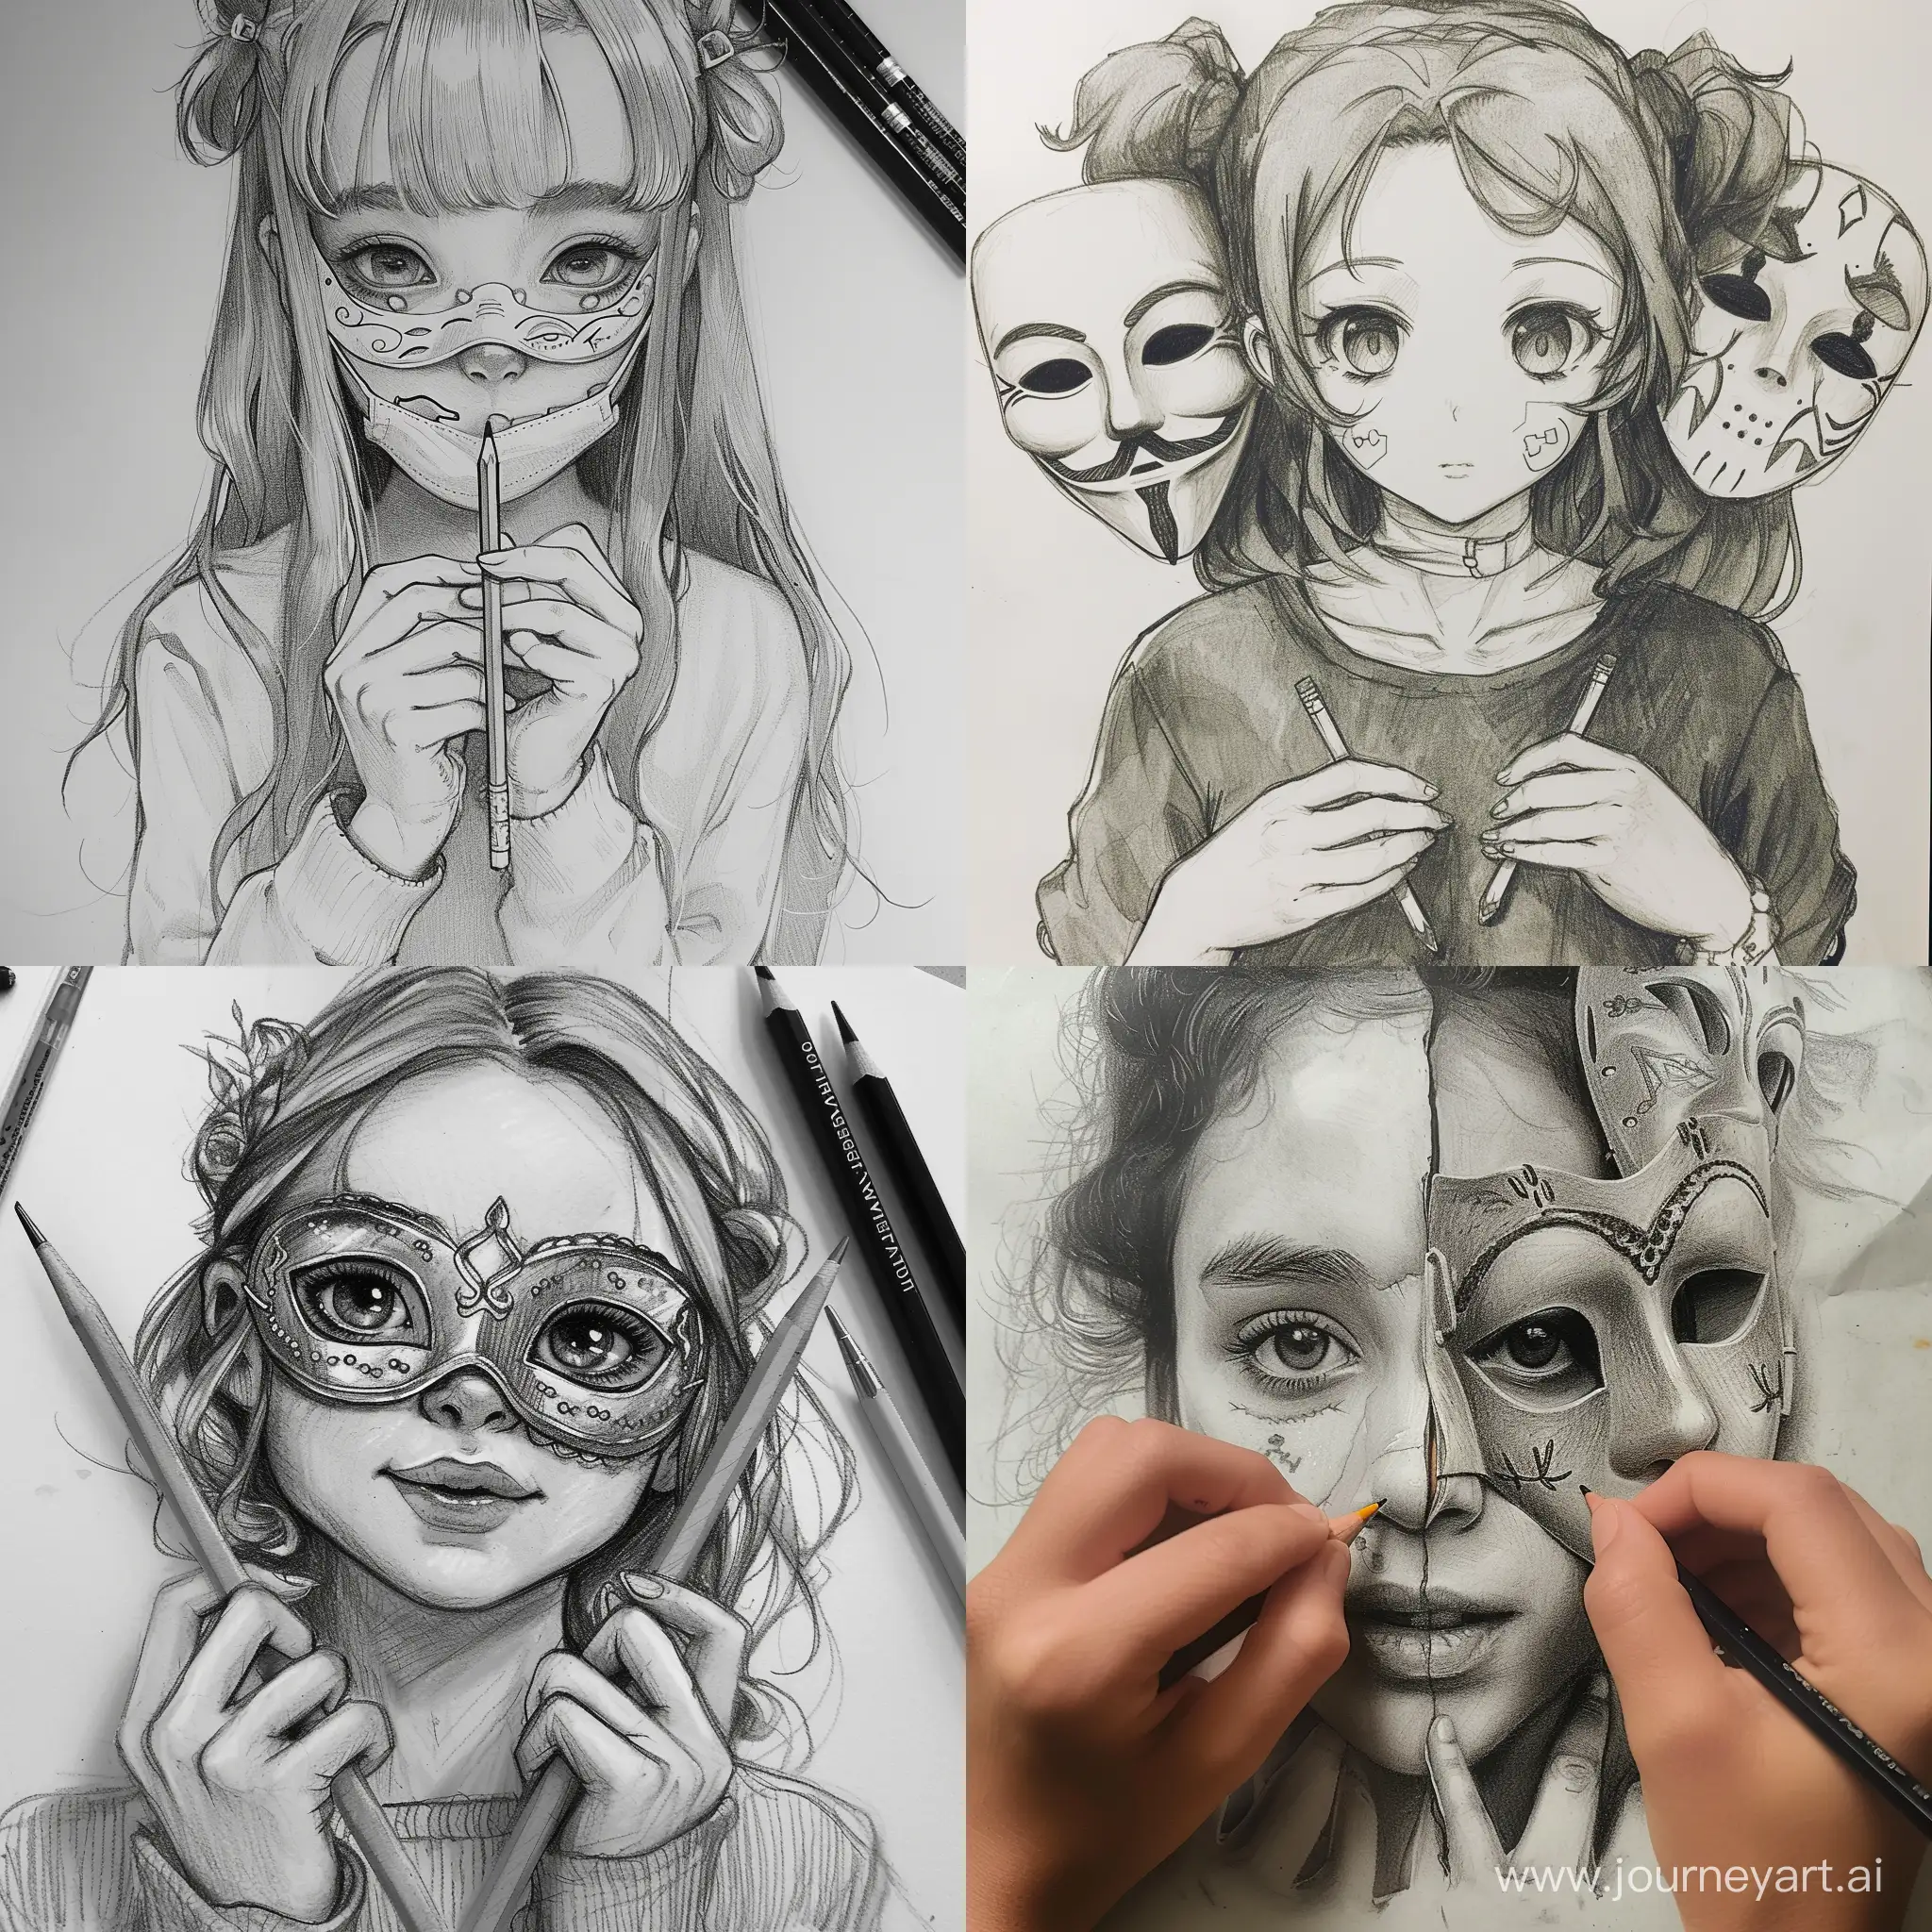 Drawing of a girl with masks and a pencil in her hands